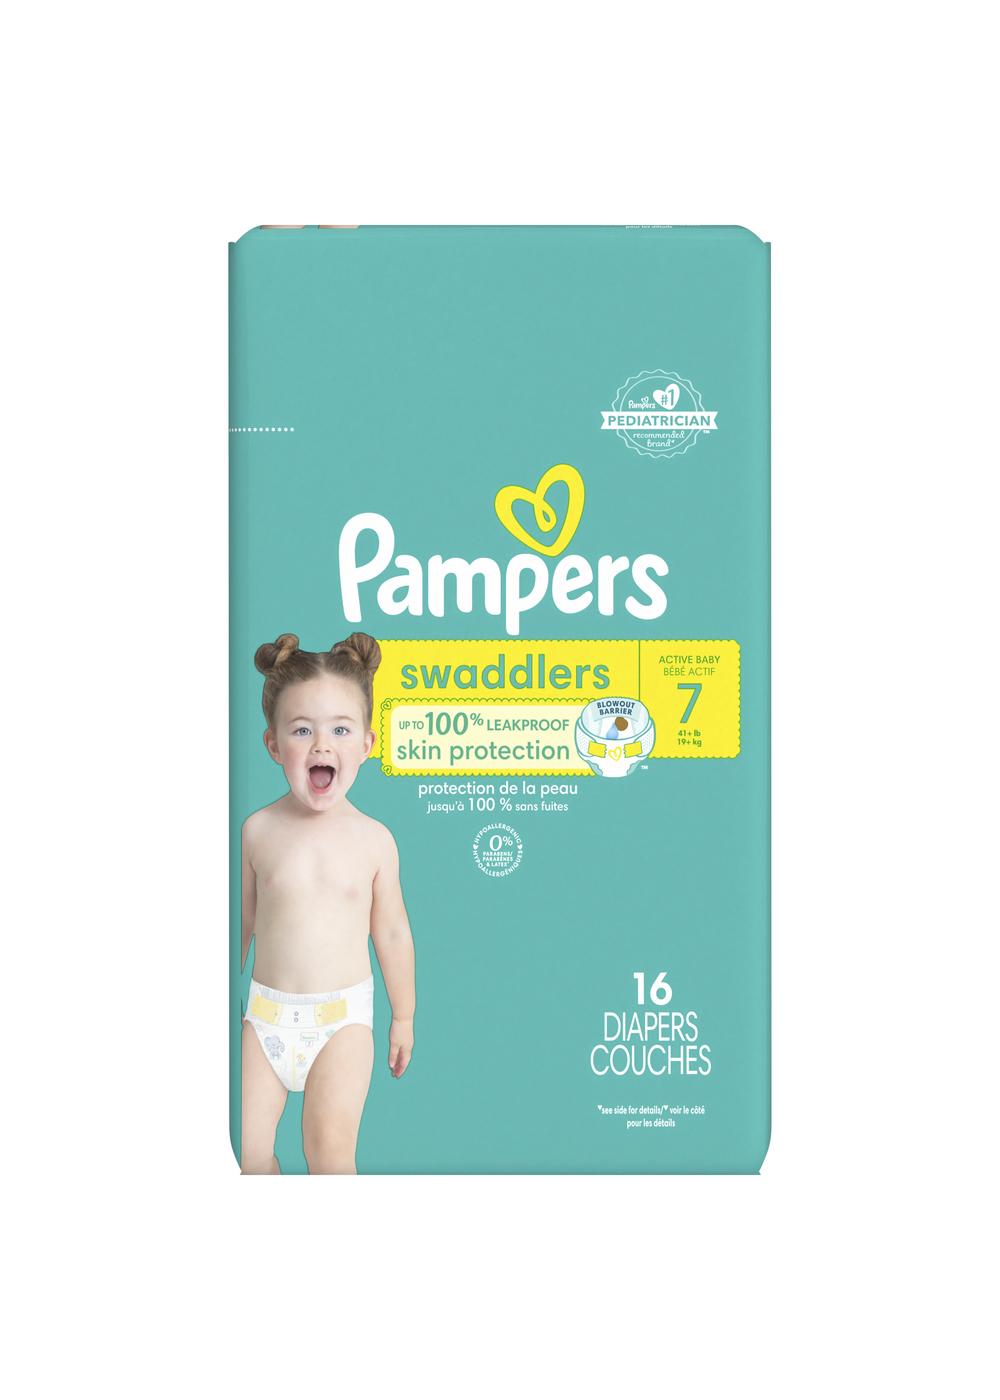 Pampers Swaddlers Baby Diapers - Size 7; image 1 of 3